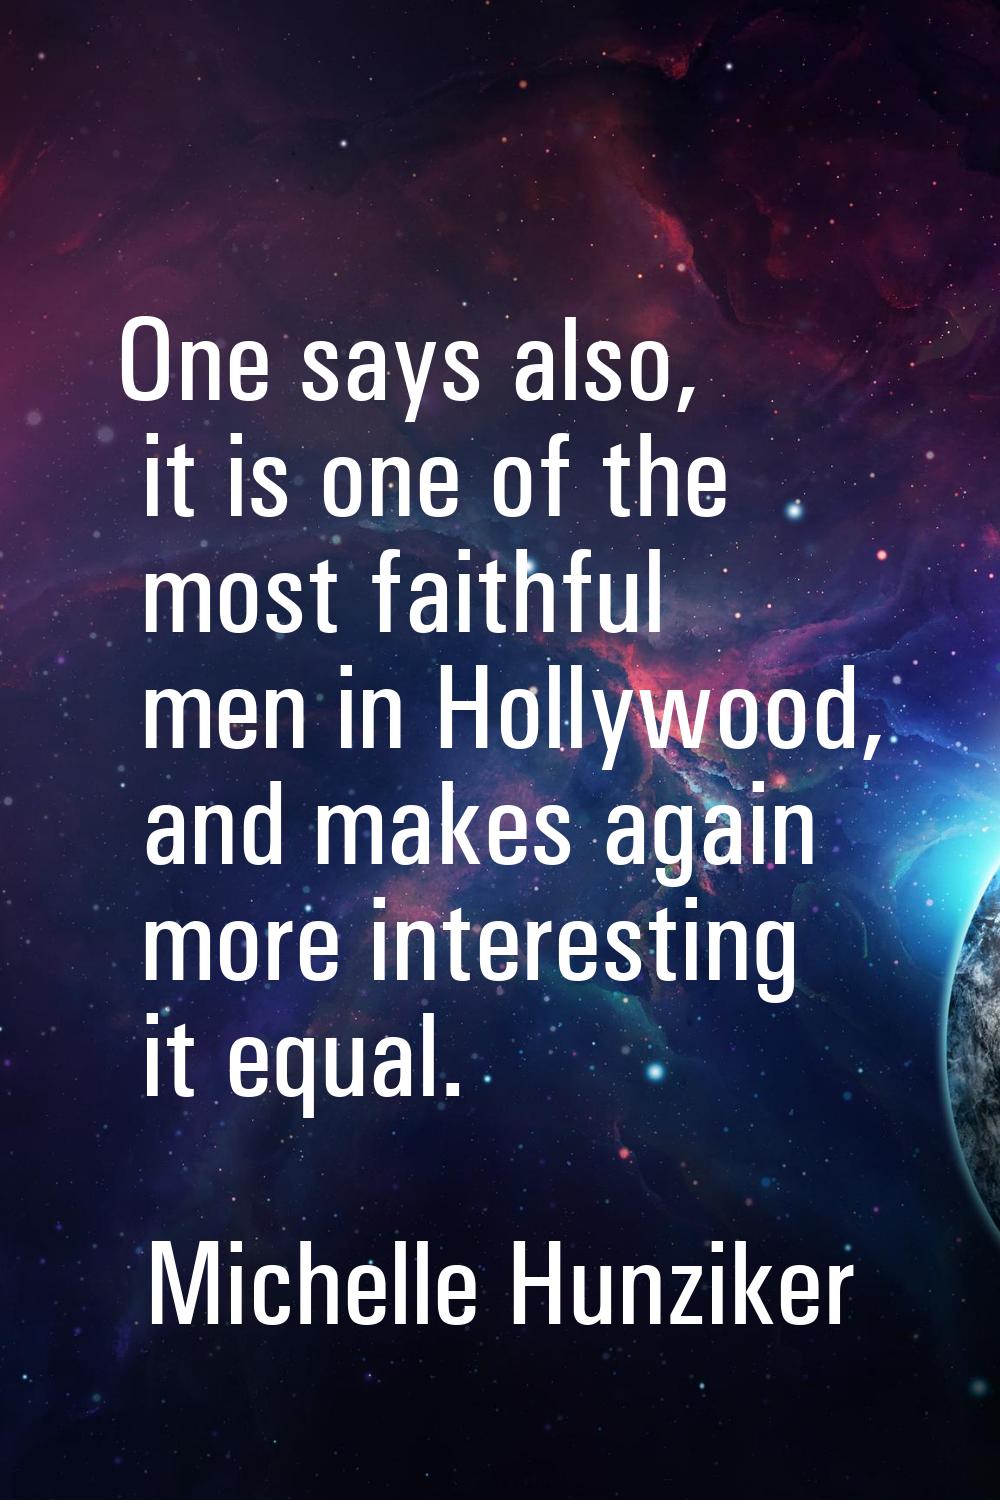 One says also, it is one of the most faithful men in Hollywood, and makes again more interesting it